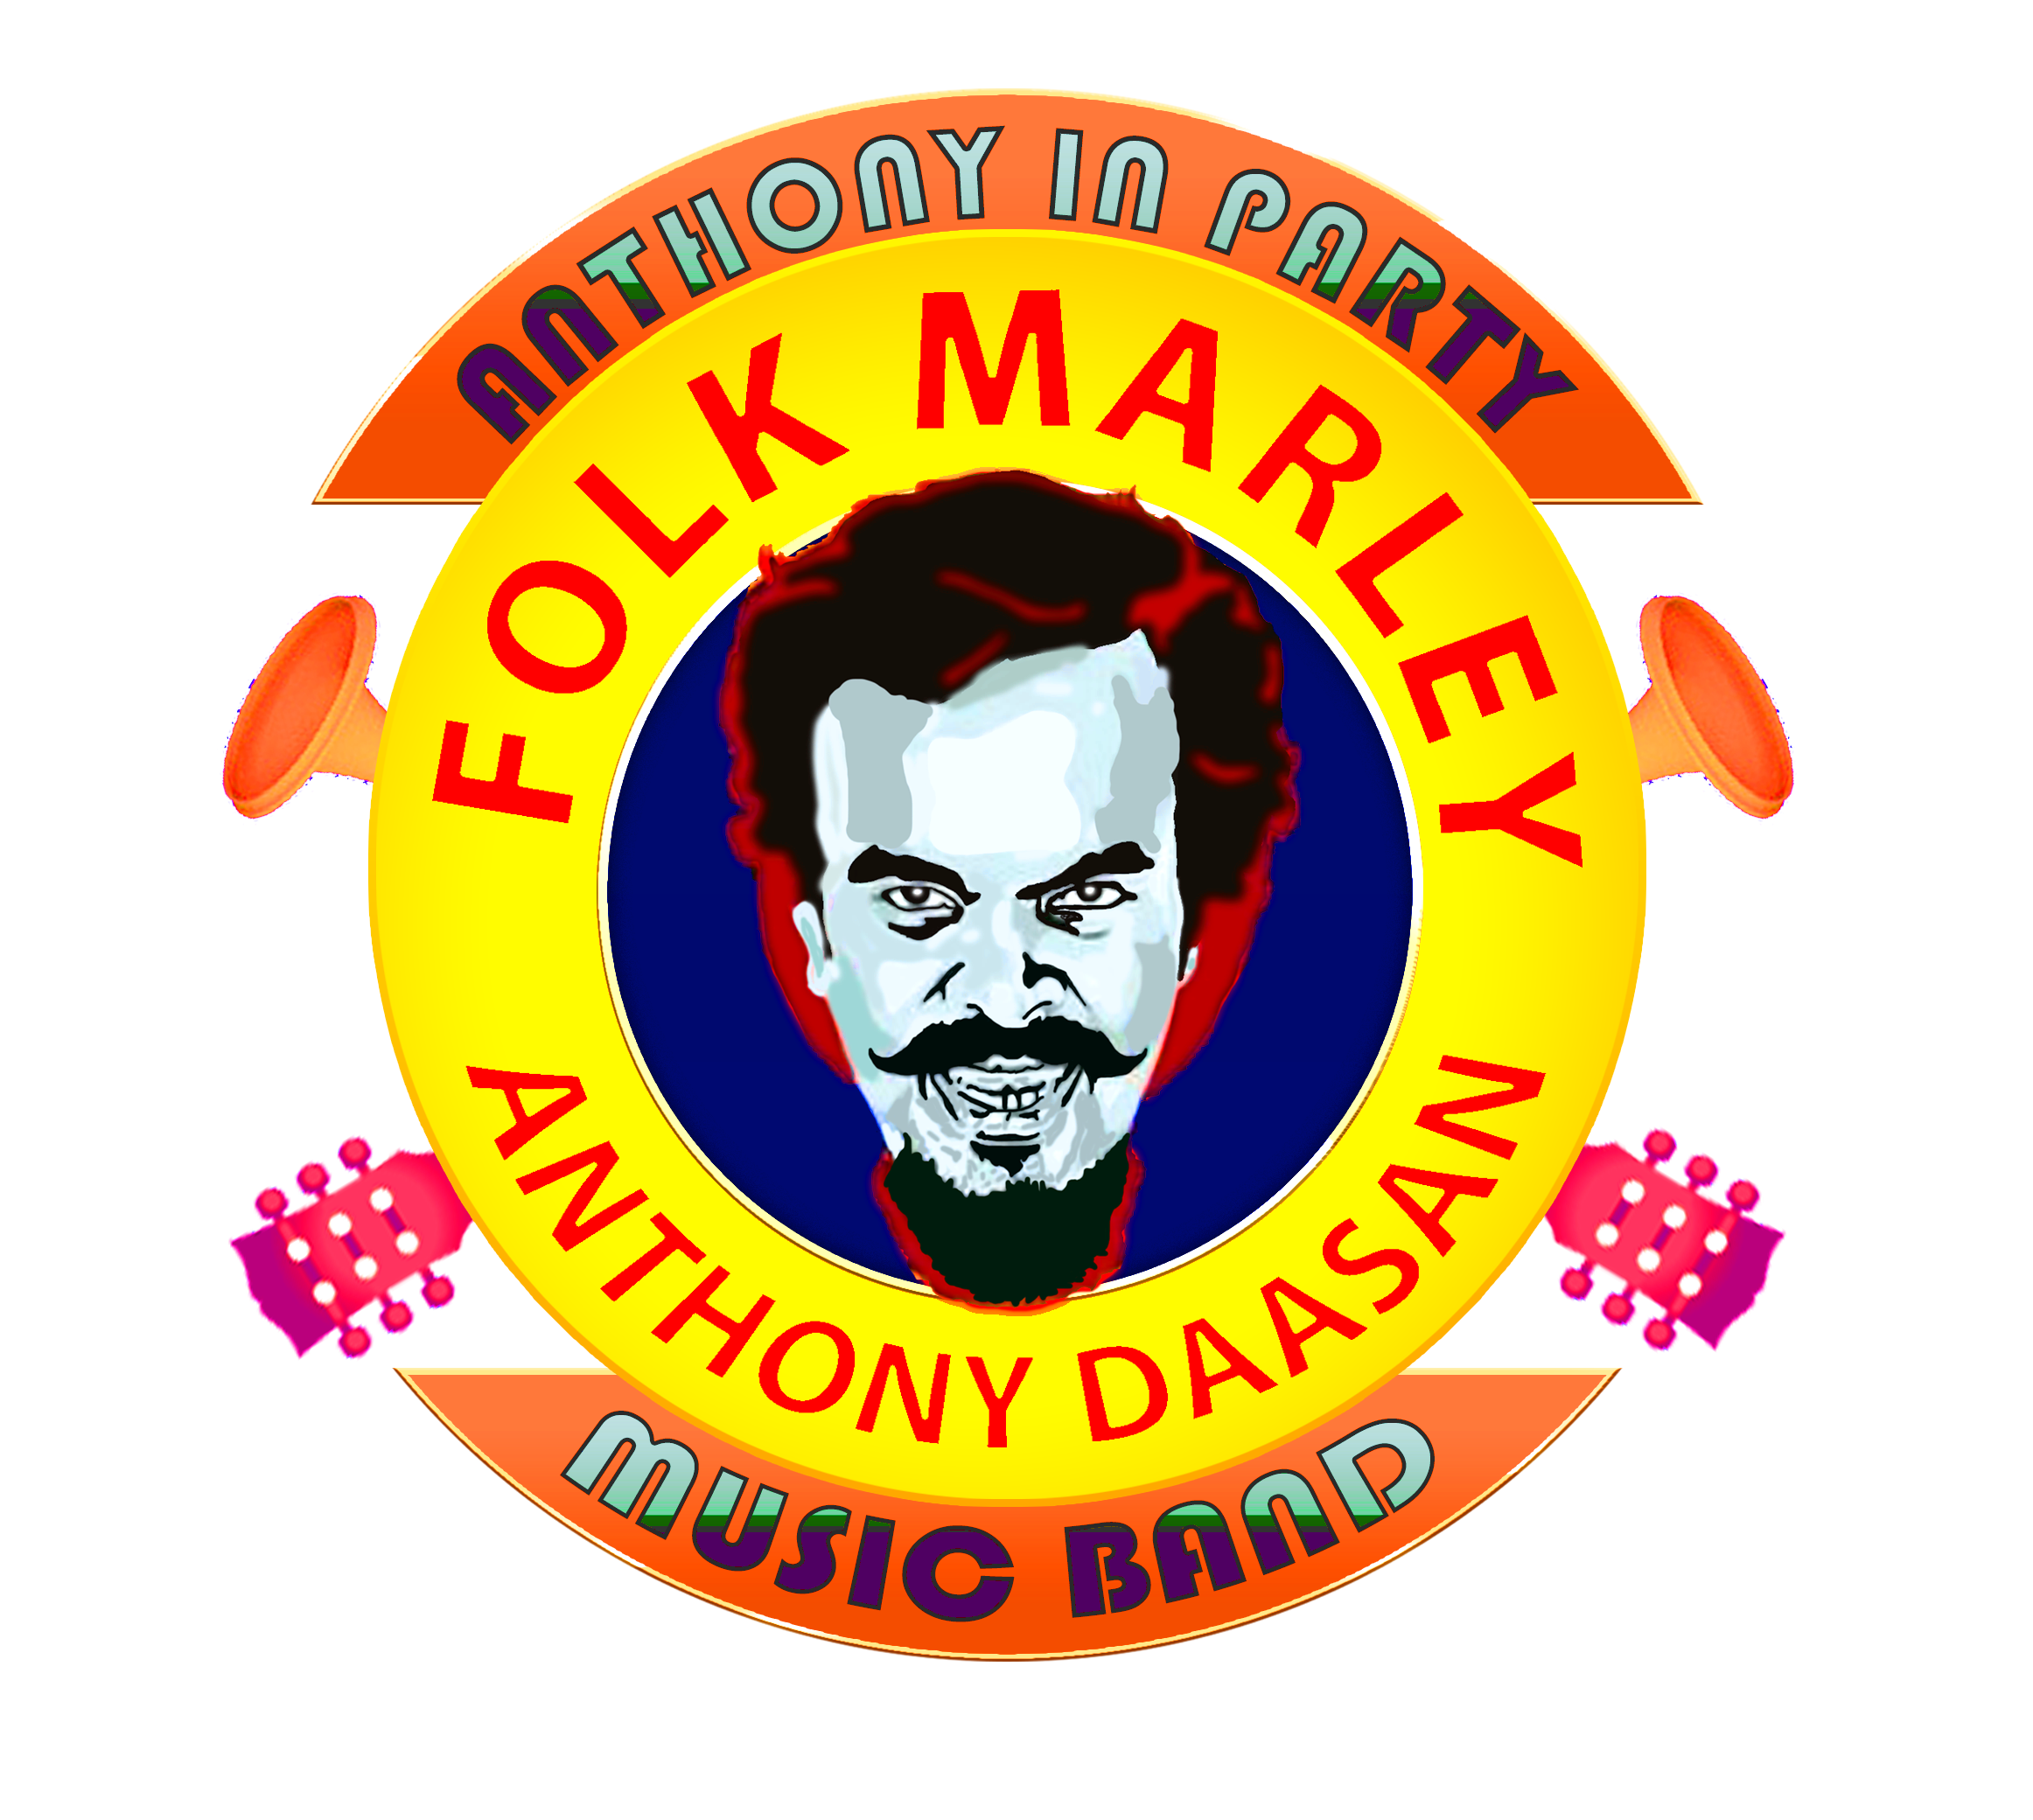 Anthony in Party Music Band Logo